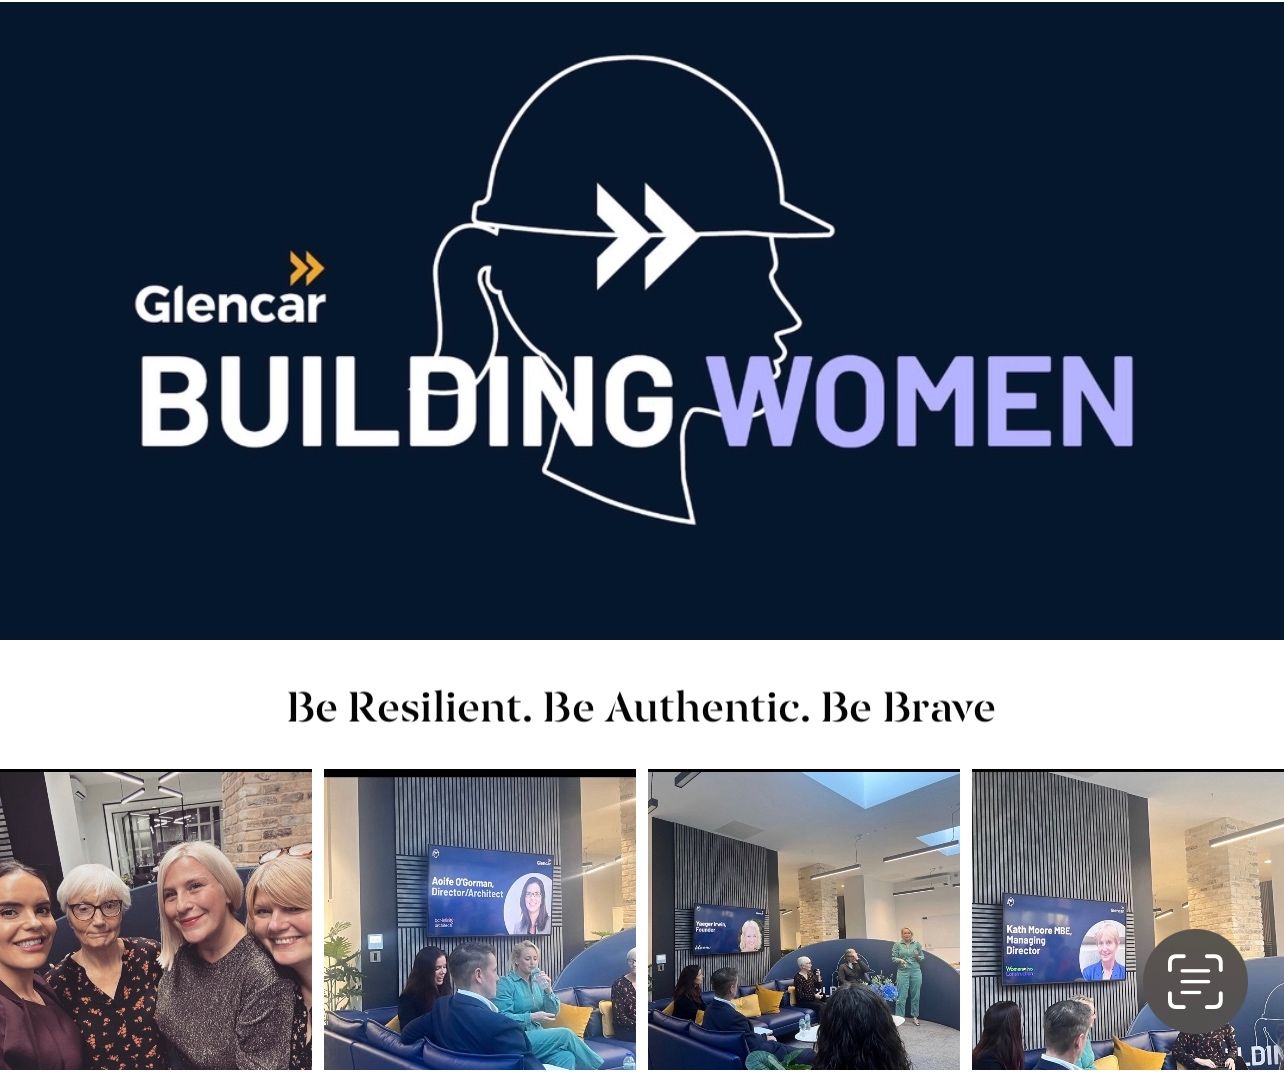 Building Women - Glencar and developing stronger constructions sites.